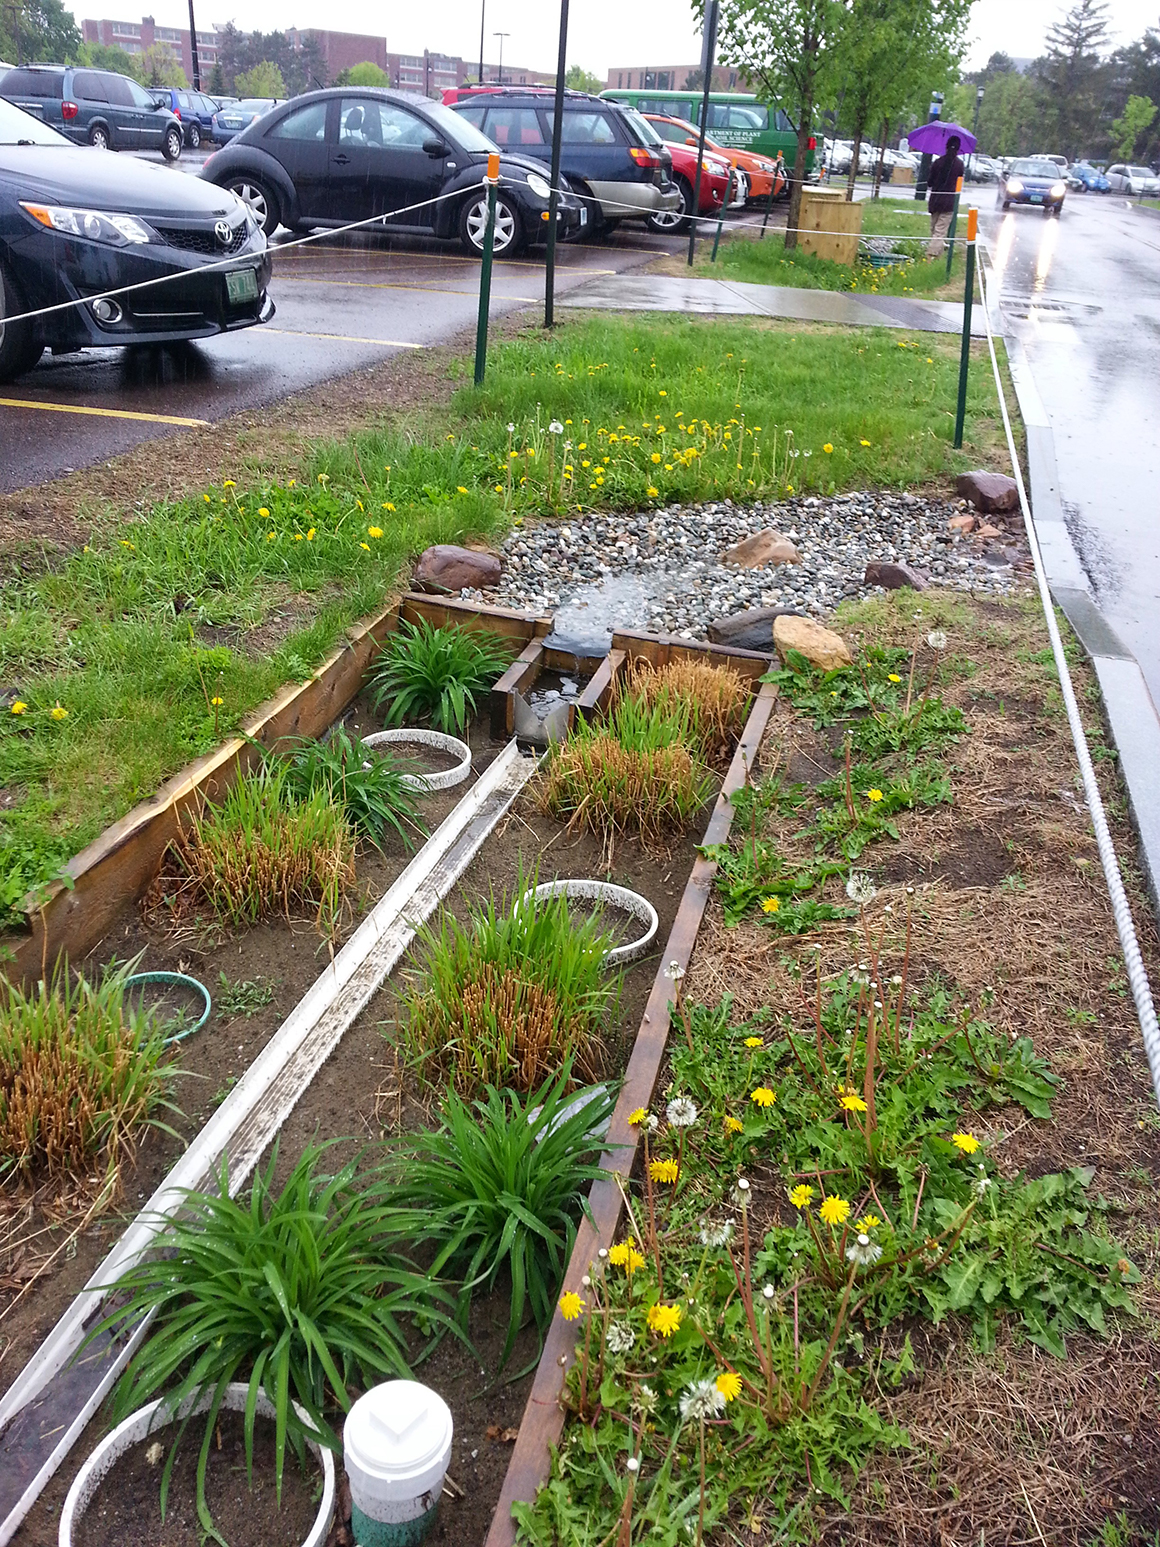 This is an image of green stormwater management where water is directed from the road into a terraced garden area alongside the road.